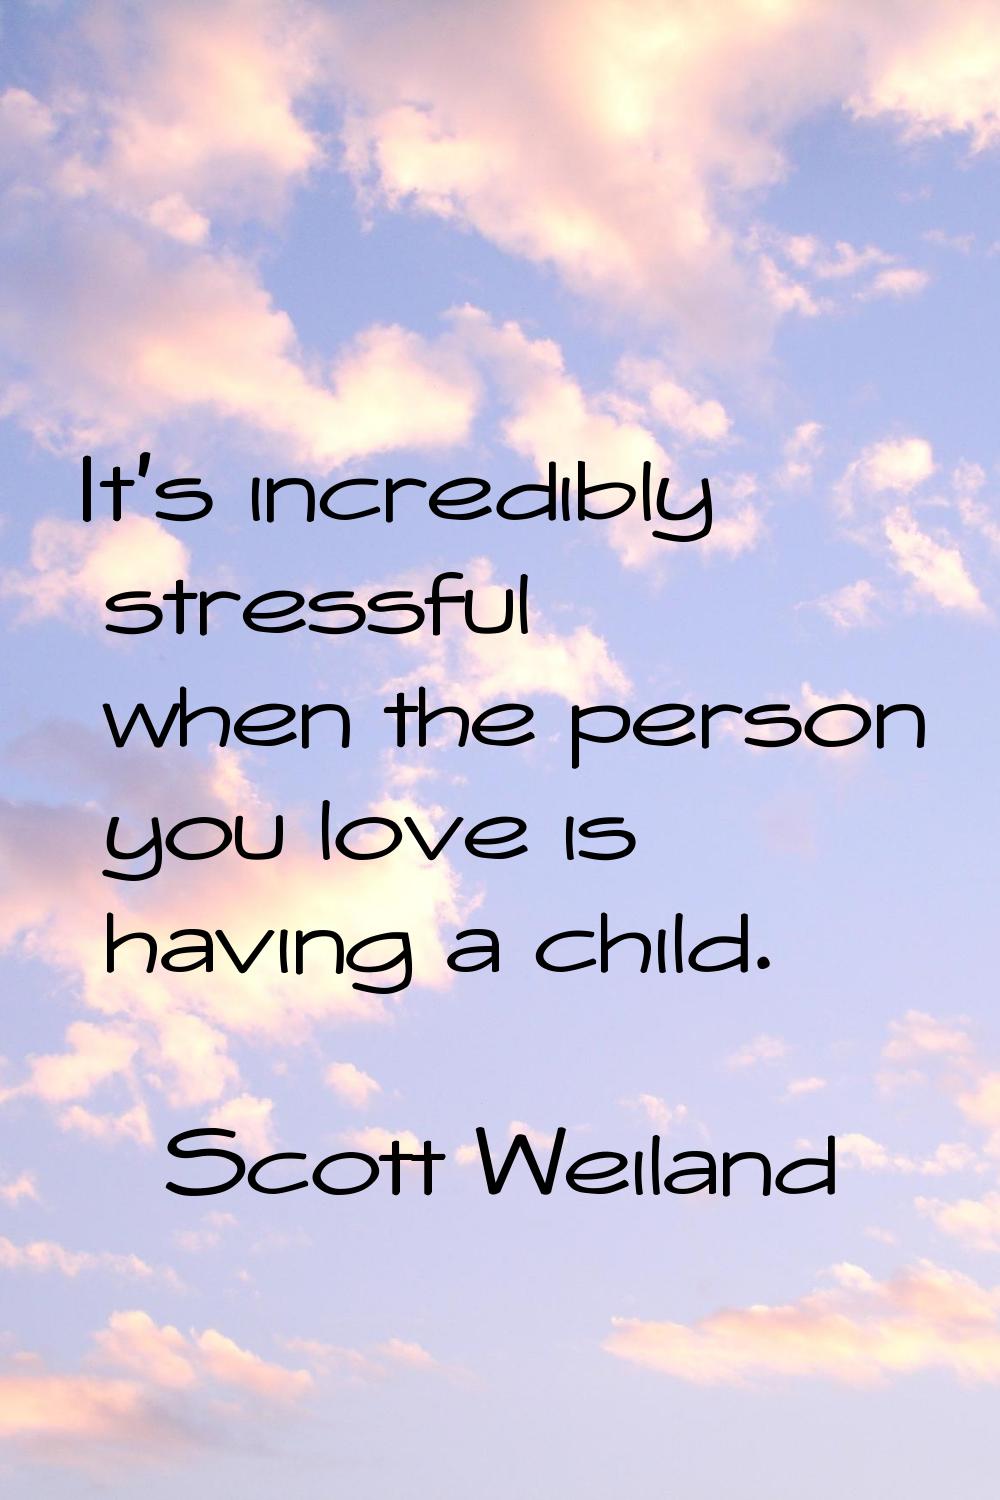 It's incredibly stressful when the person you love is having a child.